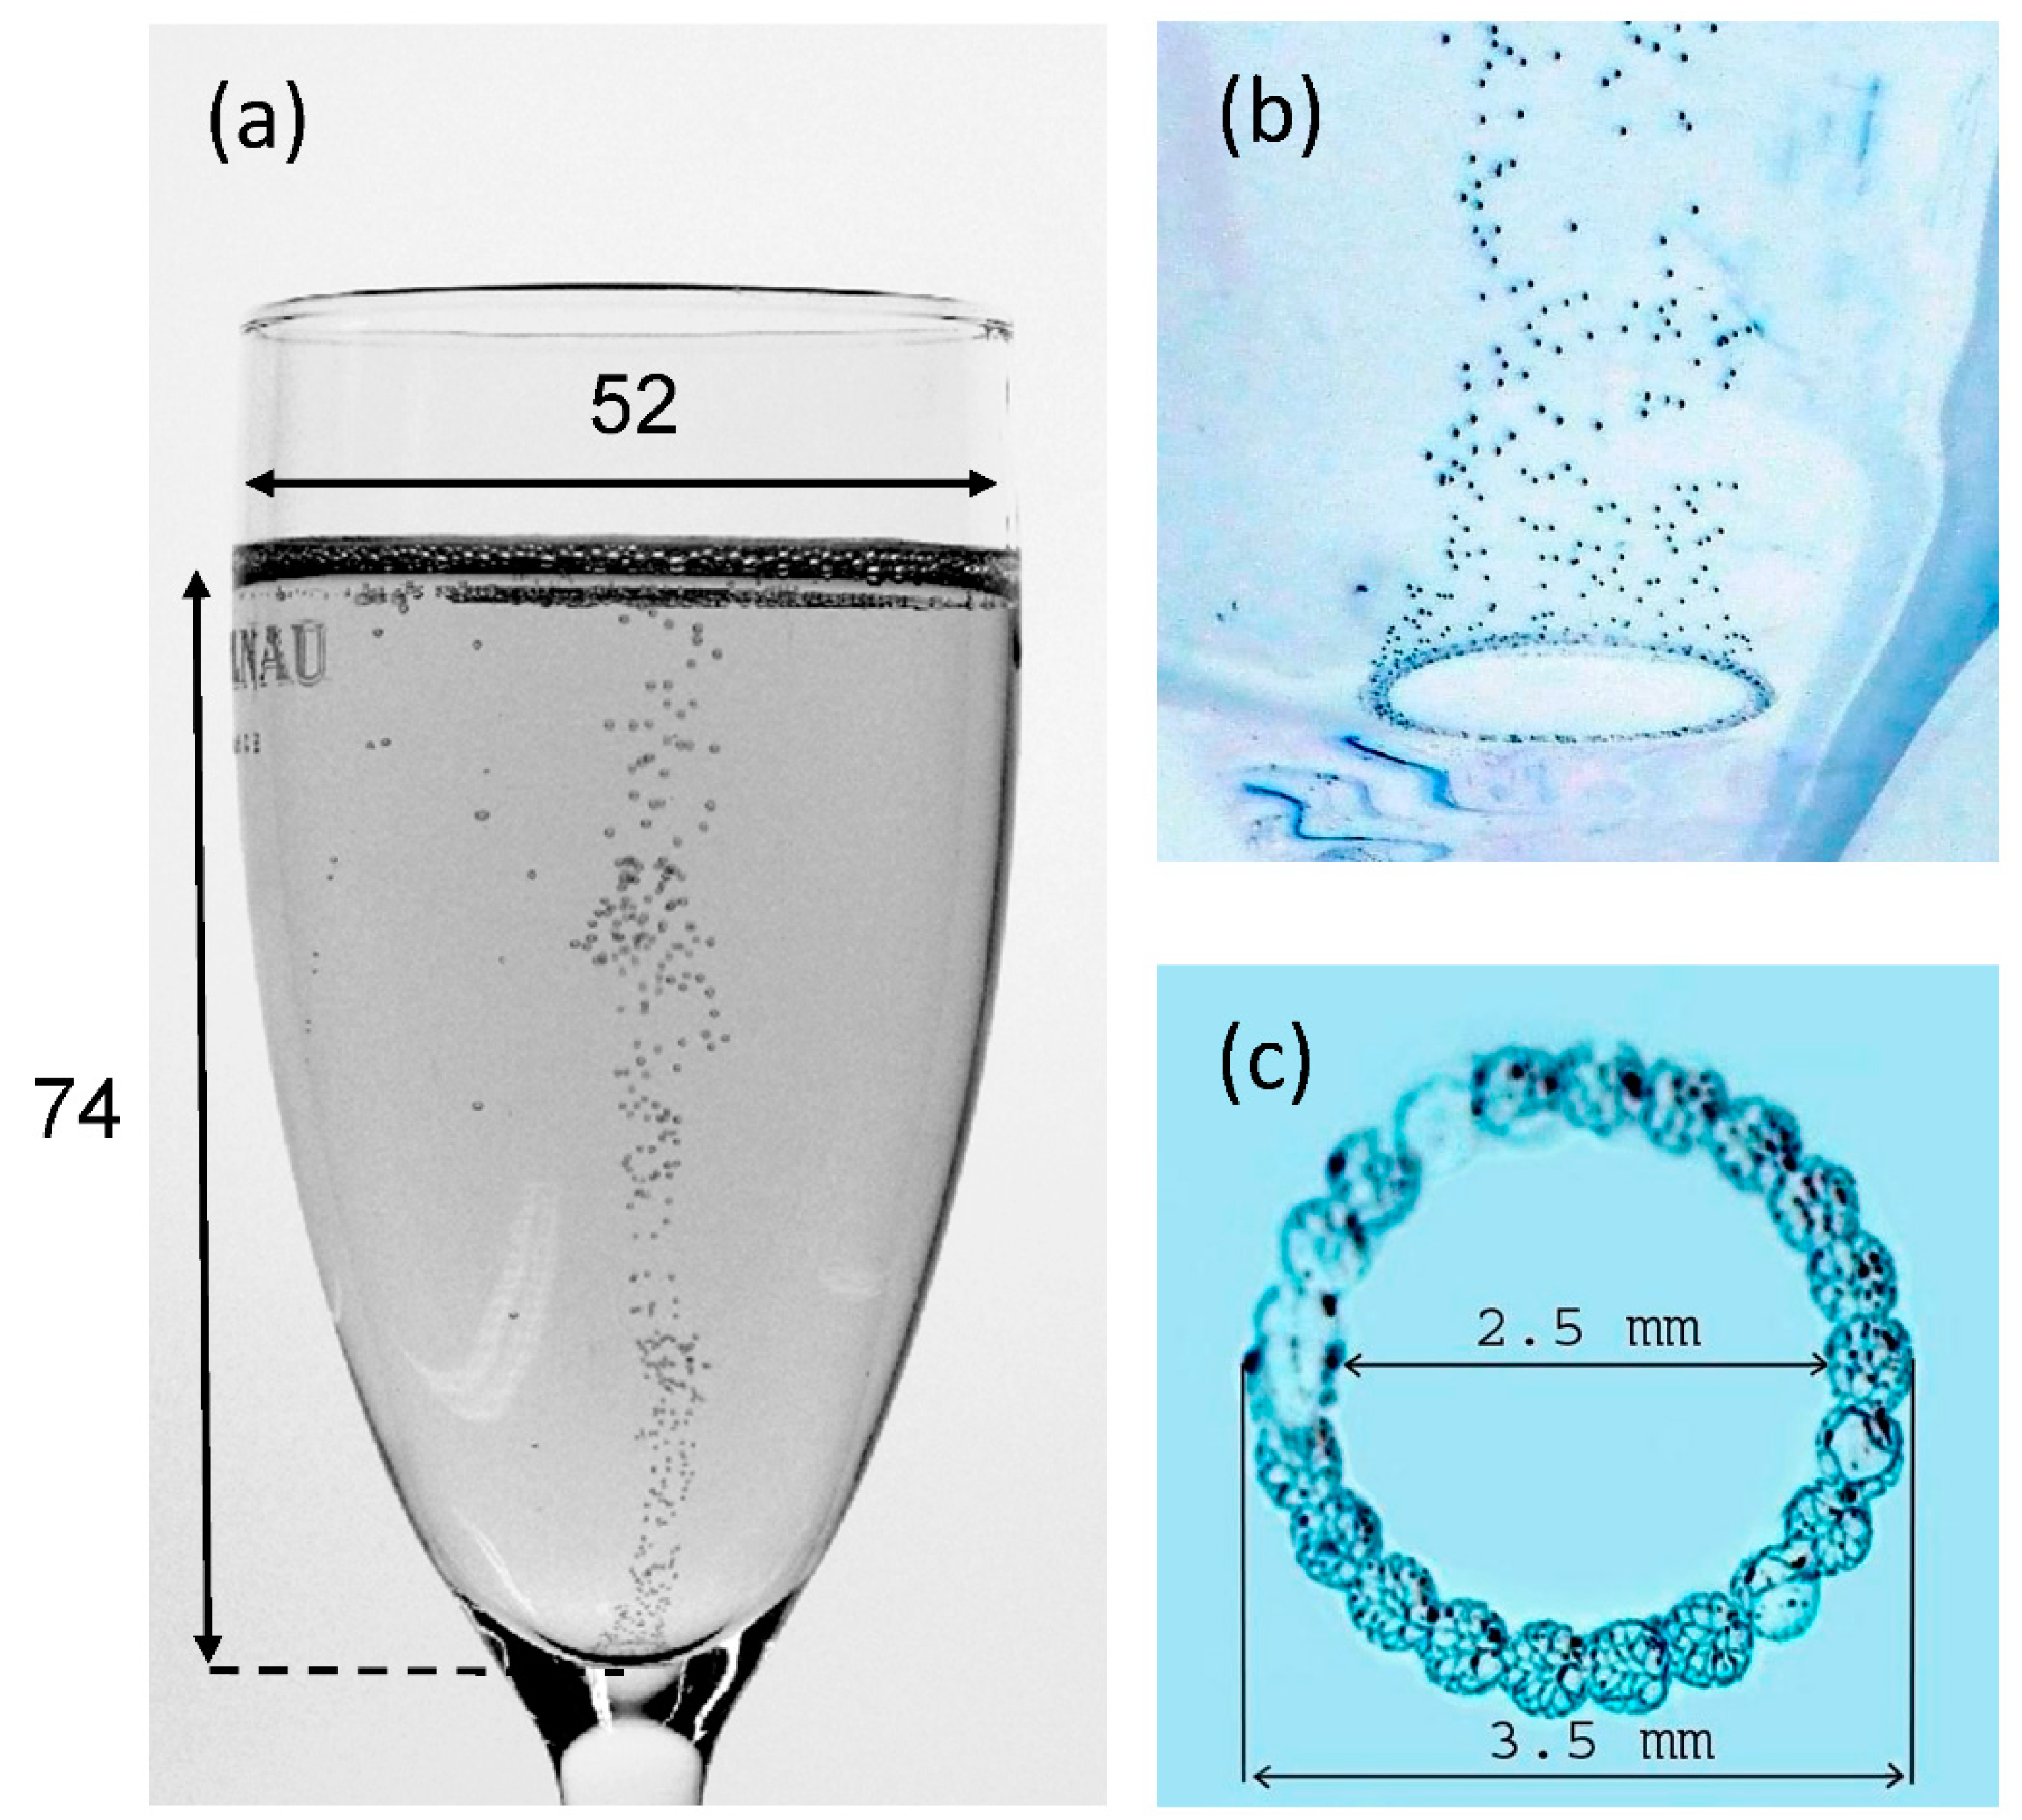 Foods Free Full Text Computational Fluid Dynamics Cfd As A Tool For Investigating Self Organized Ascending Bubble Driven Flow Patterns In Champagne Glasses Html